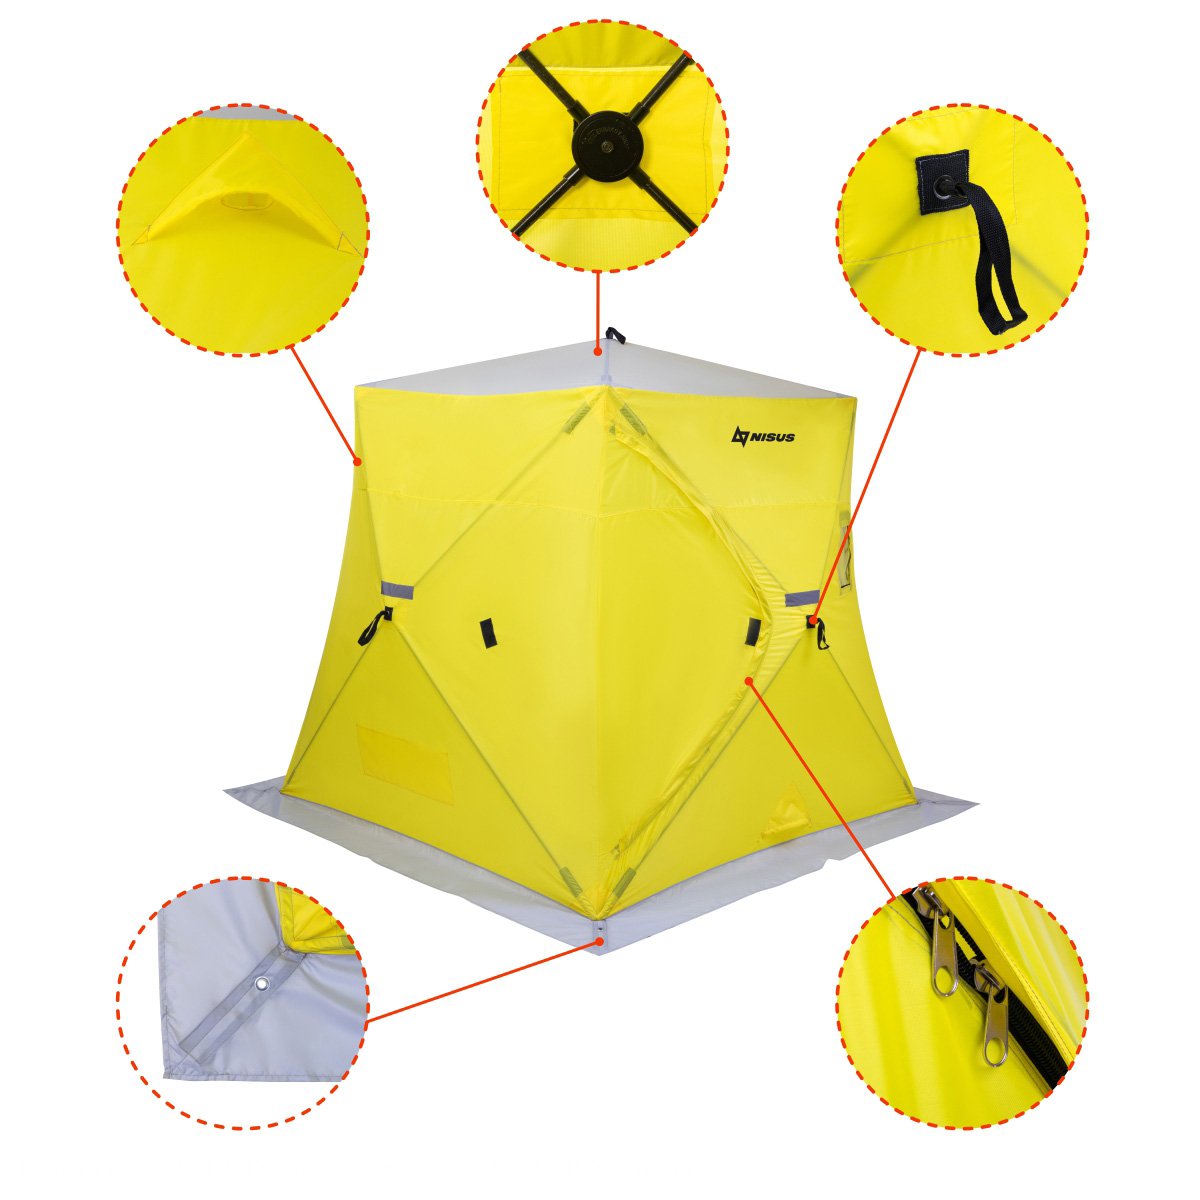 Prism Roomy Ice Fishing 3 Person Shelter is equipped with an extra wide protective skirt with apertures for ice anchors to fix the shelter, windows for ventilation, solid fiberglass frameand zippers to widely open/close the shelter